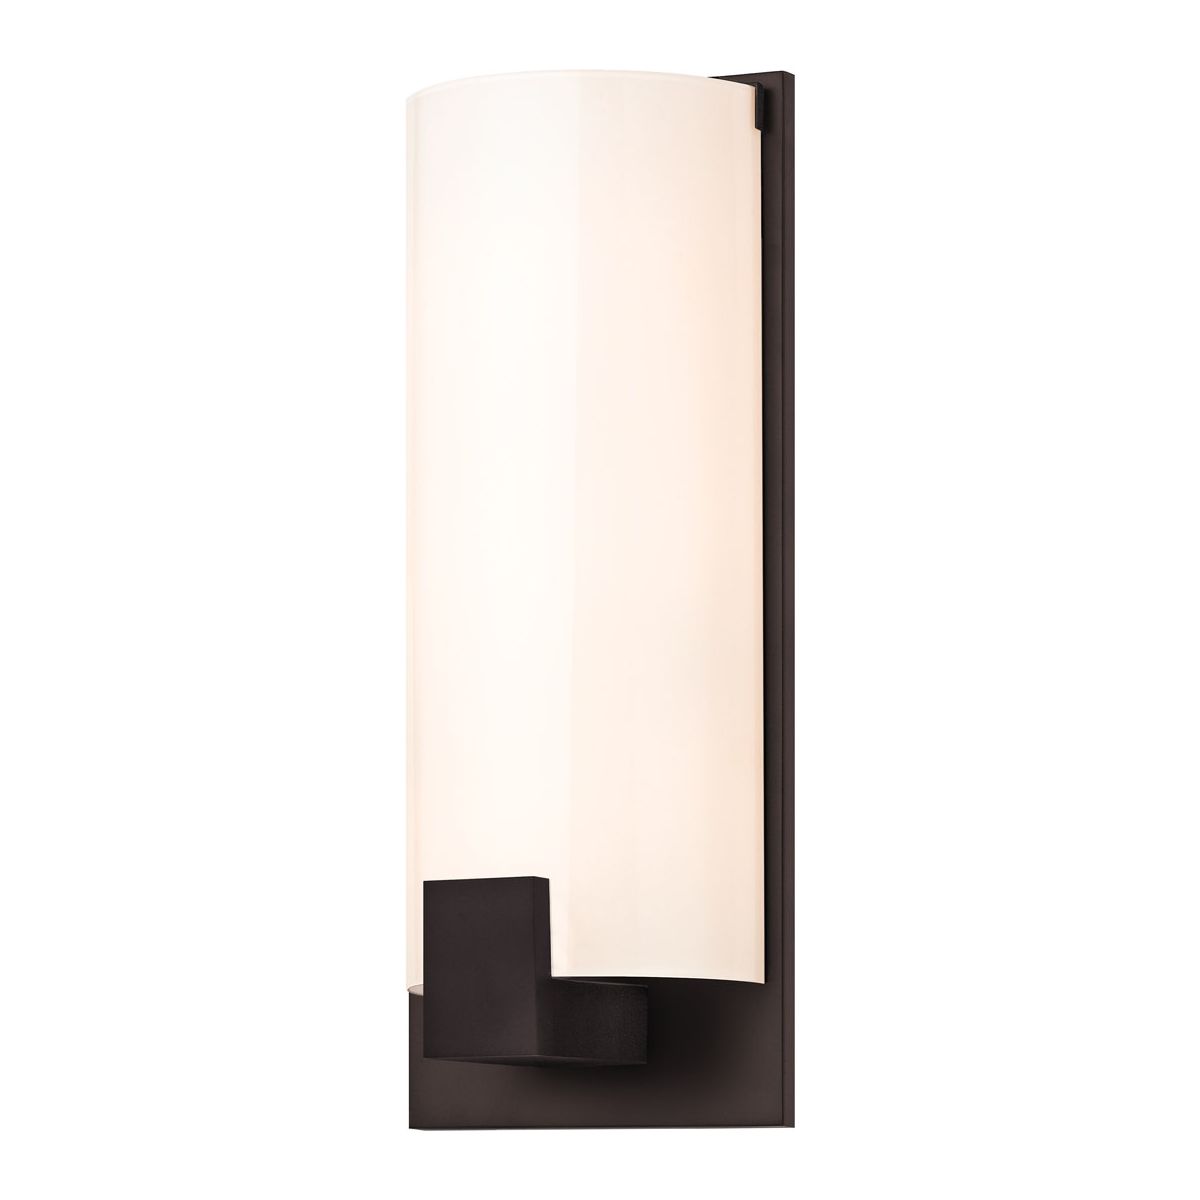 Tangent Square Sconce